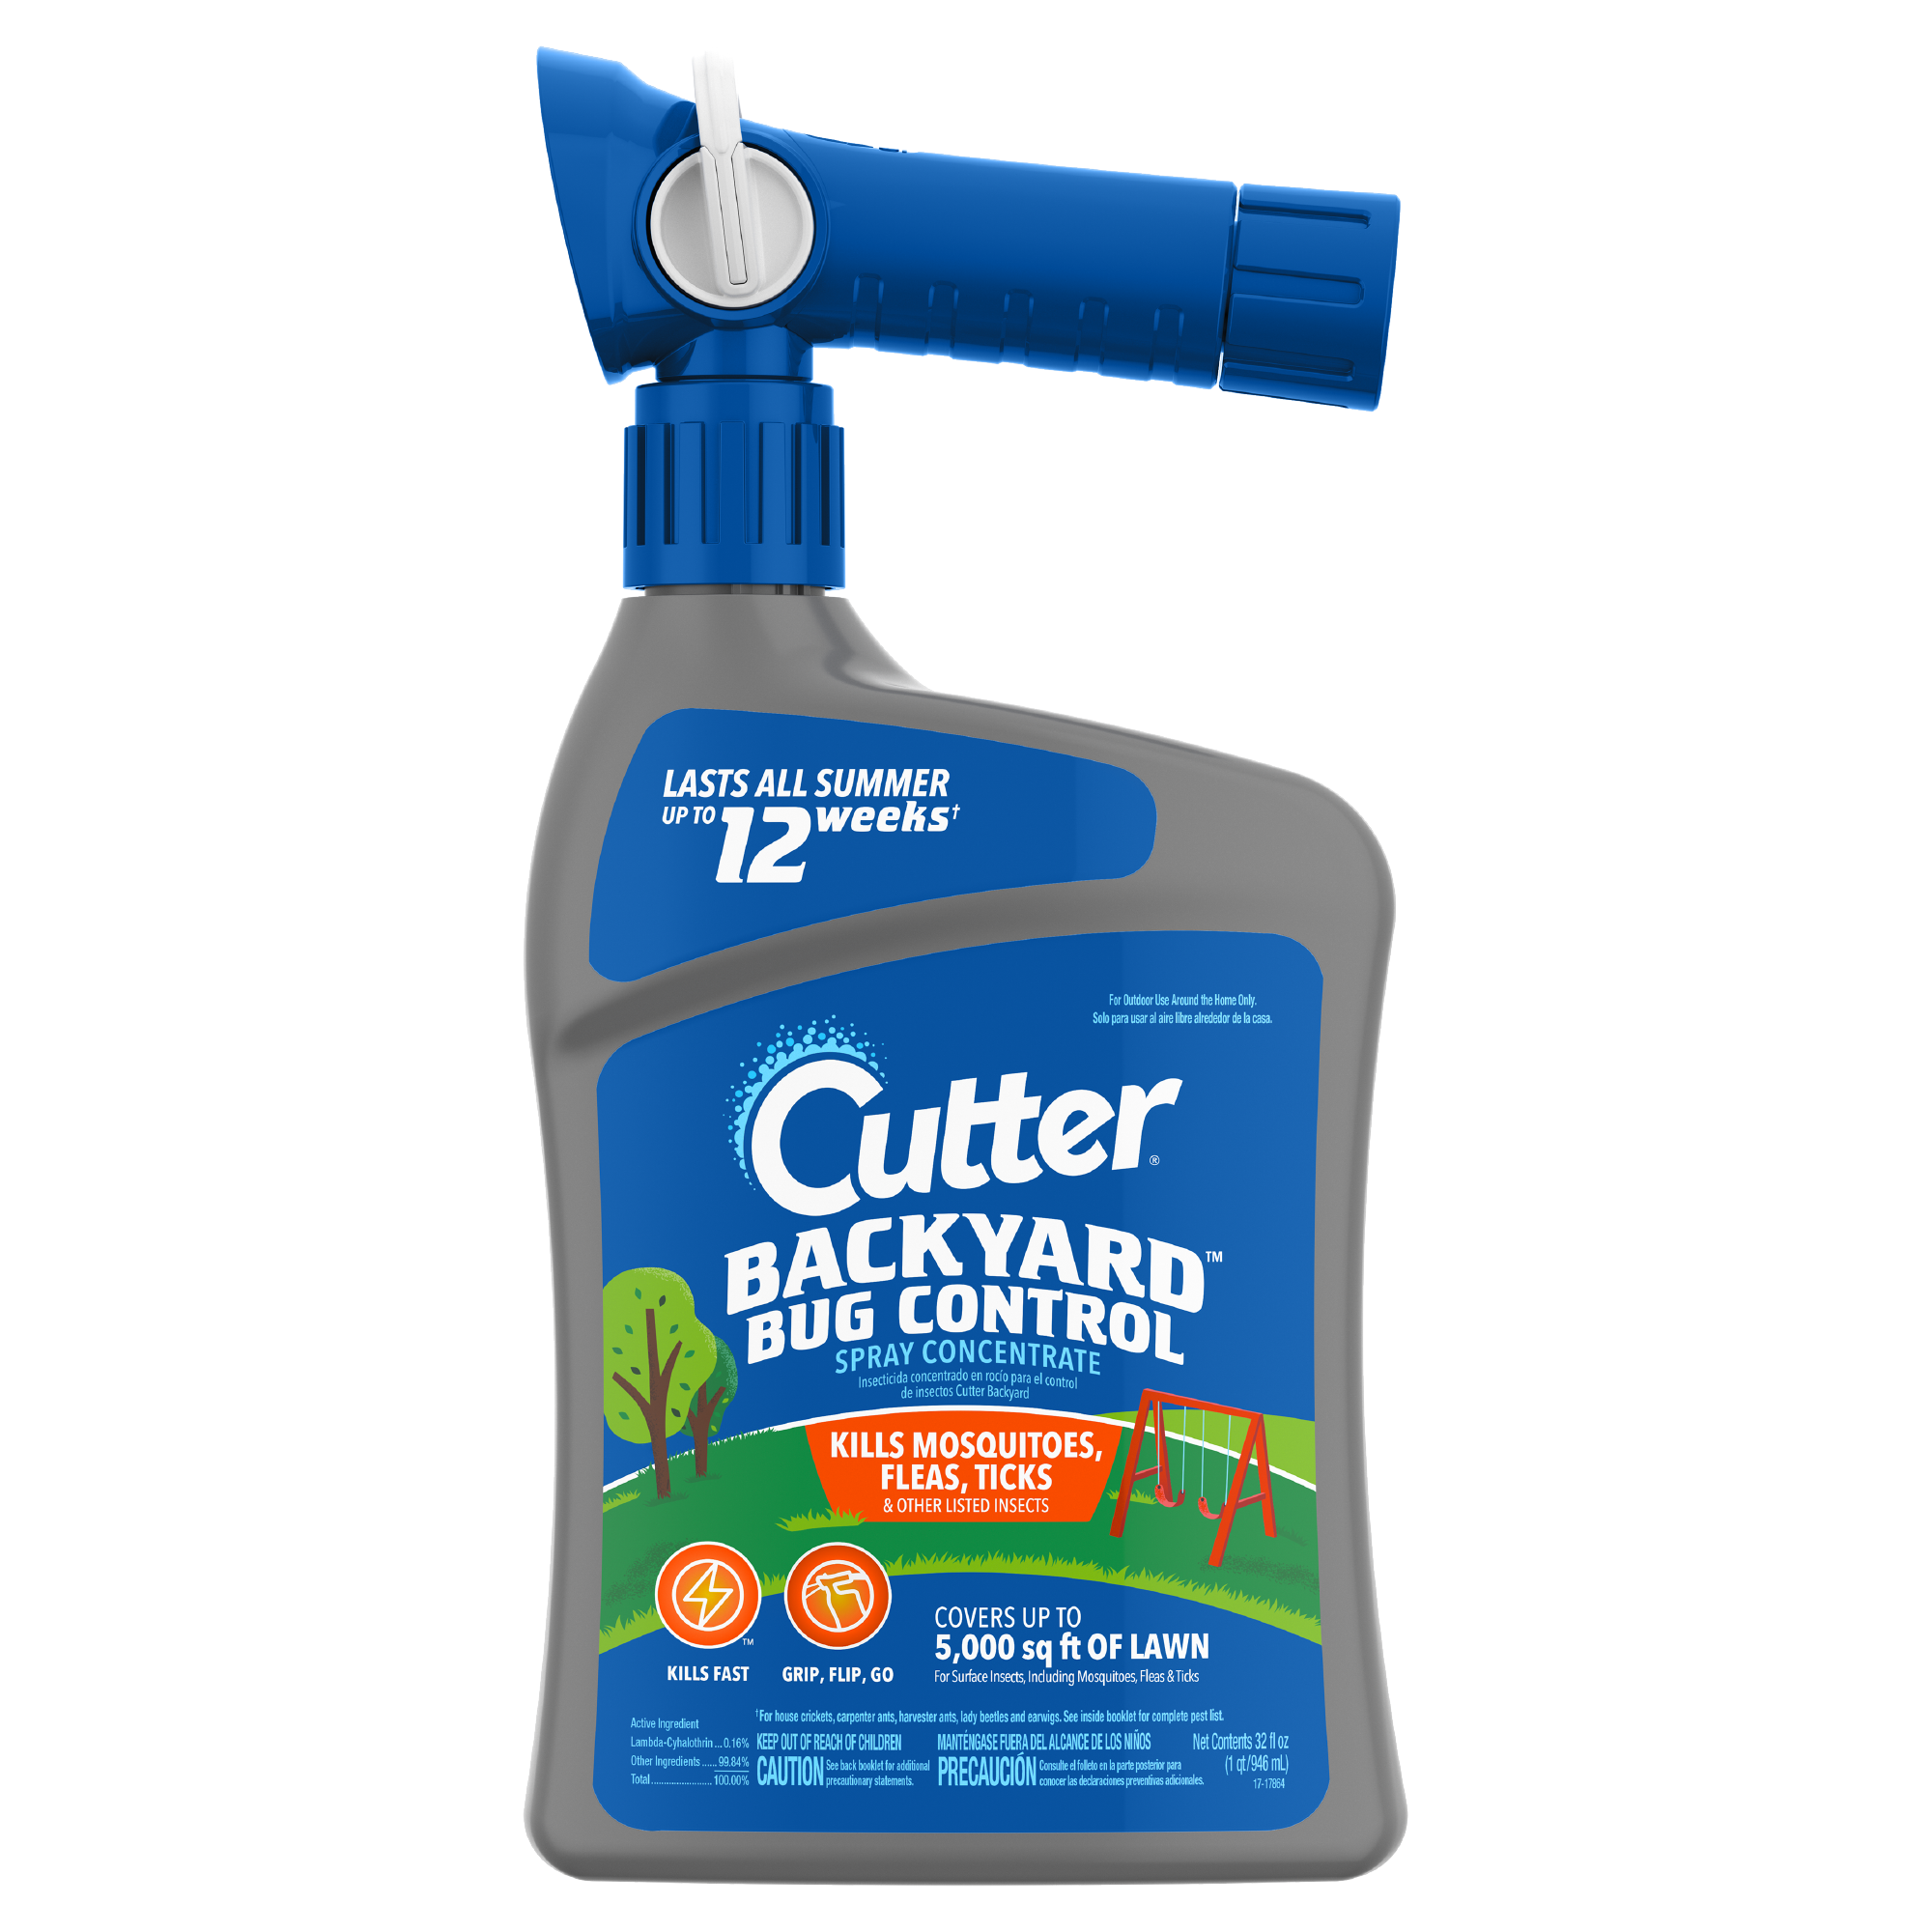 Cutter Backyard Bug Control Insecticide Concentrate with QuickFlip Hose-End Sprayer, 32 Ounces - image 1 of 11